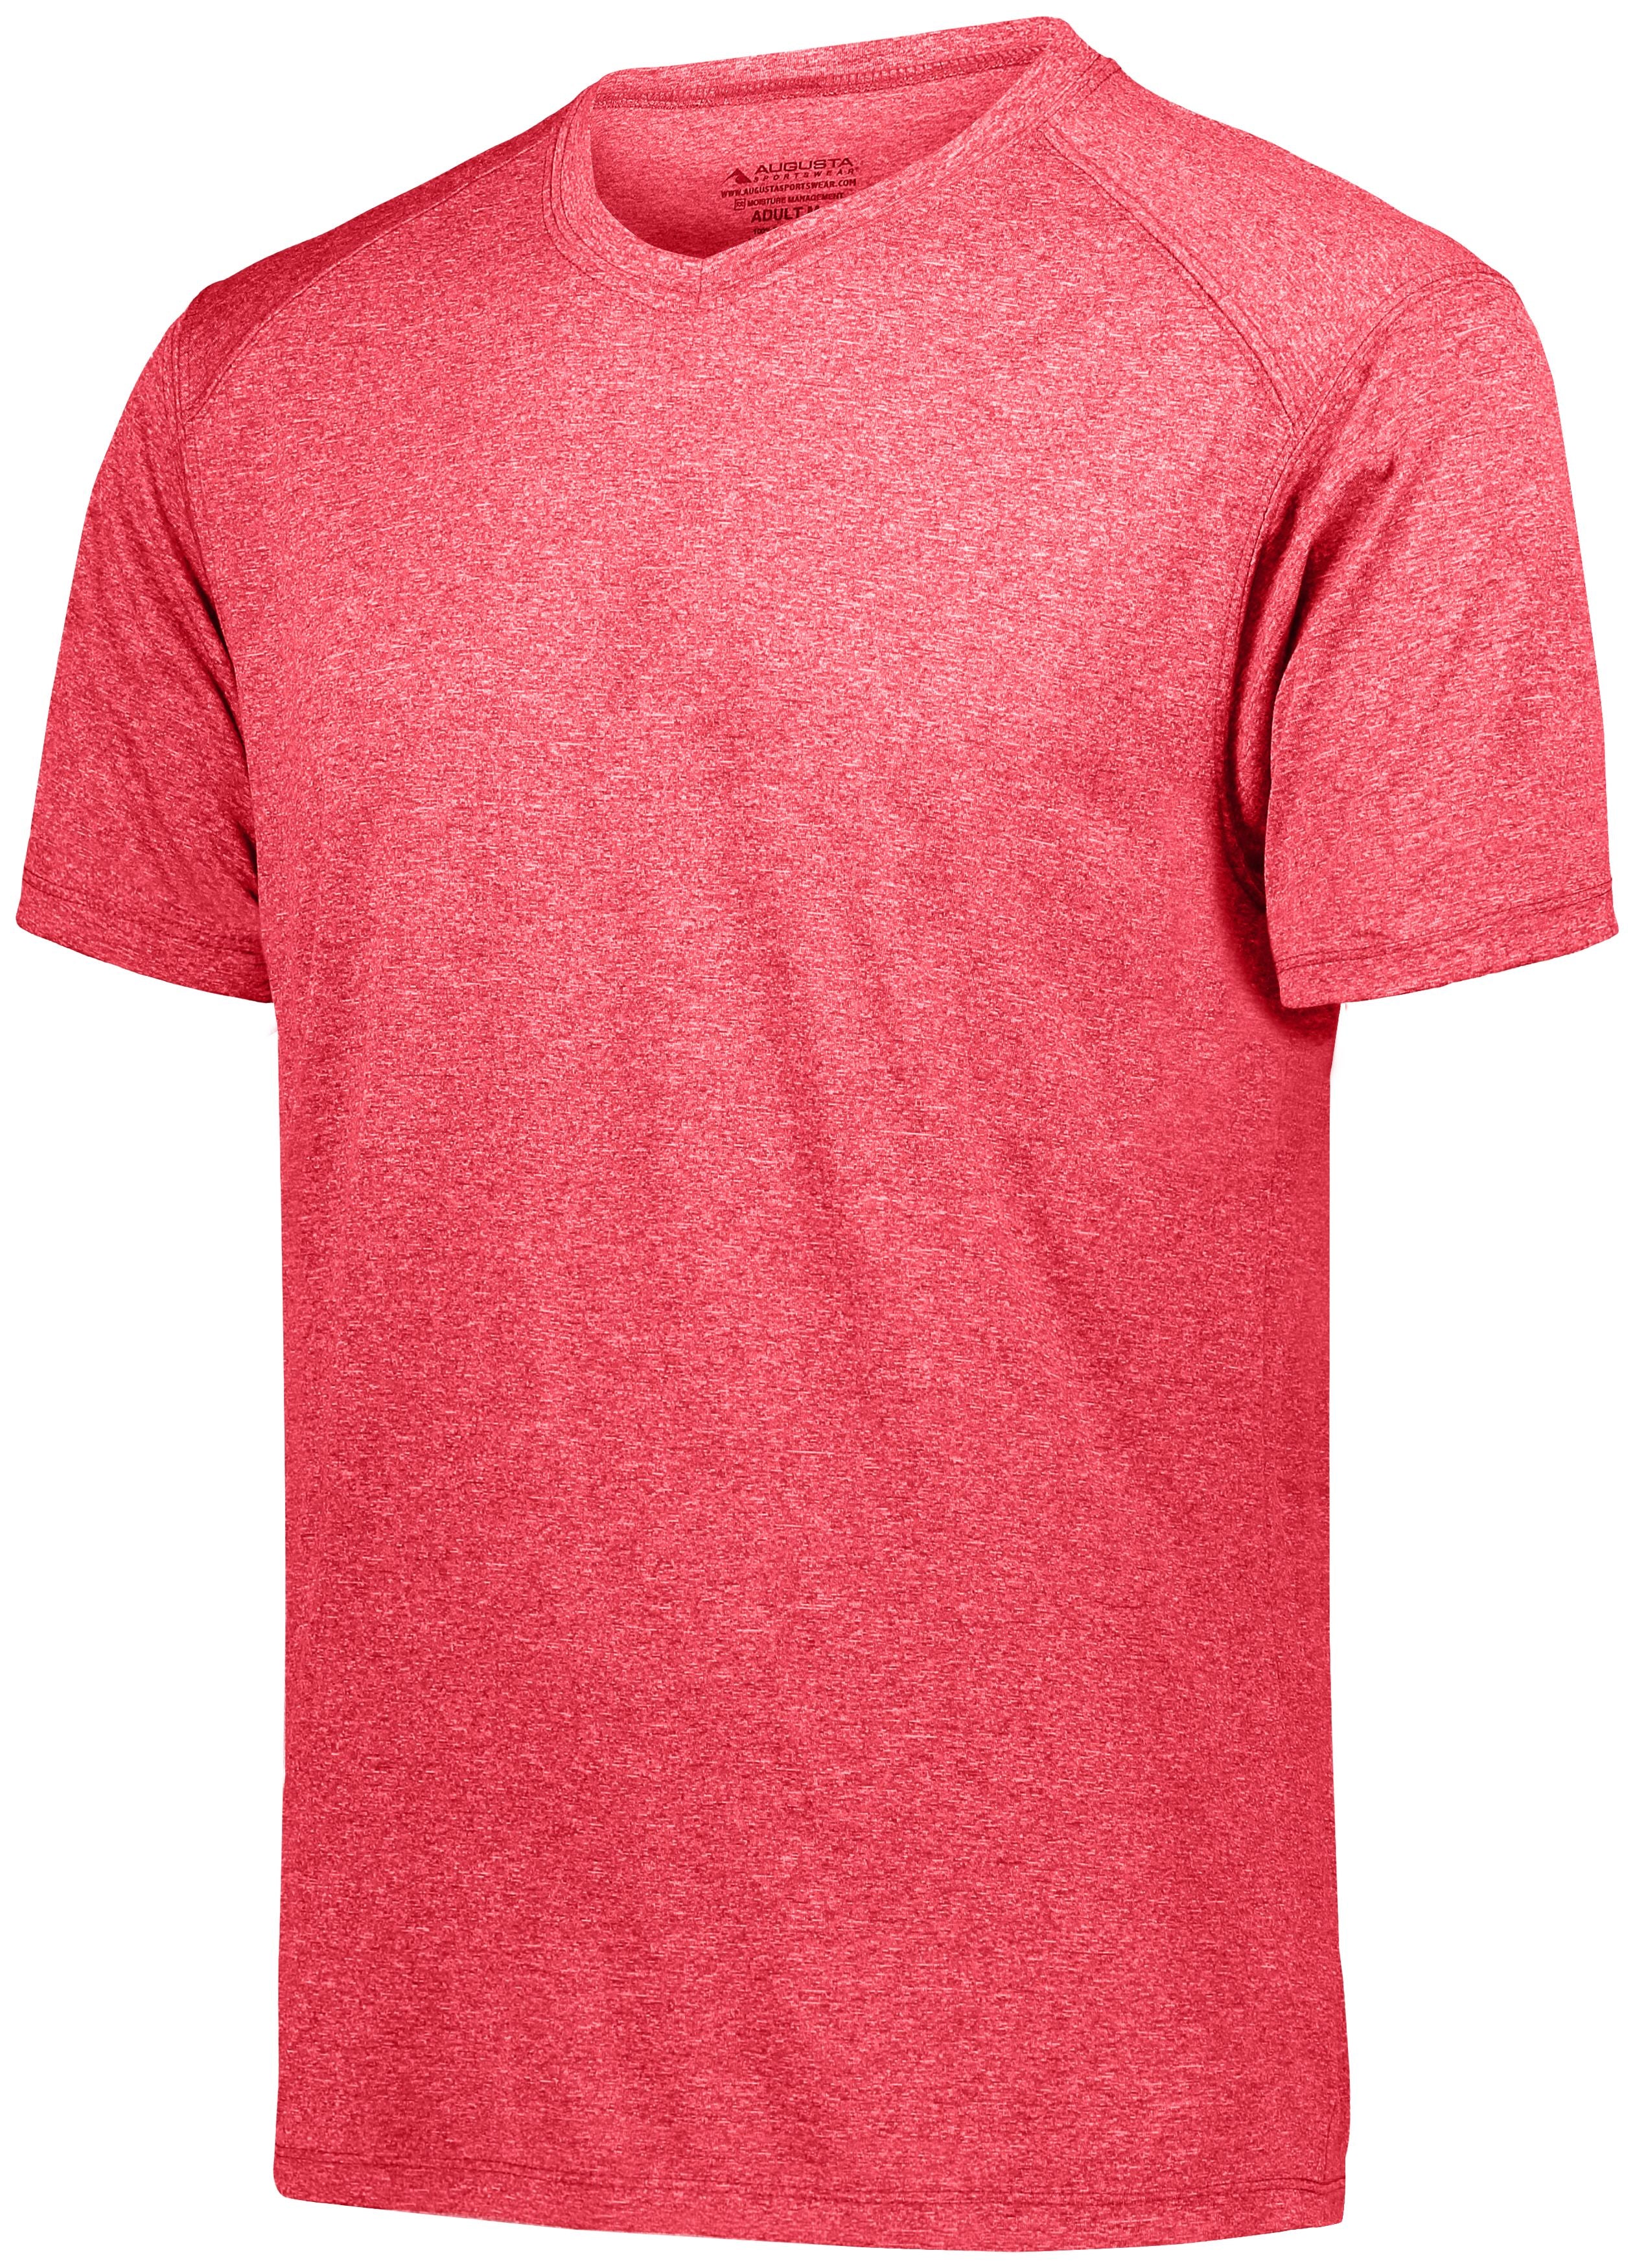 Augusta Sportswear Kinergy Training Tee in Red Heather  -Part of the Adult, Adult-Tee-Shirt, T-Shirts, Augusta-Products, Shirts product lines at KanaleyCreations.com